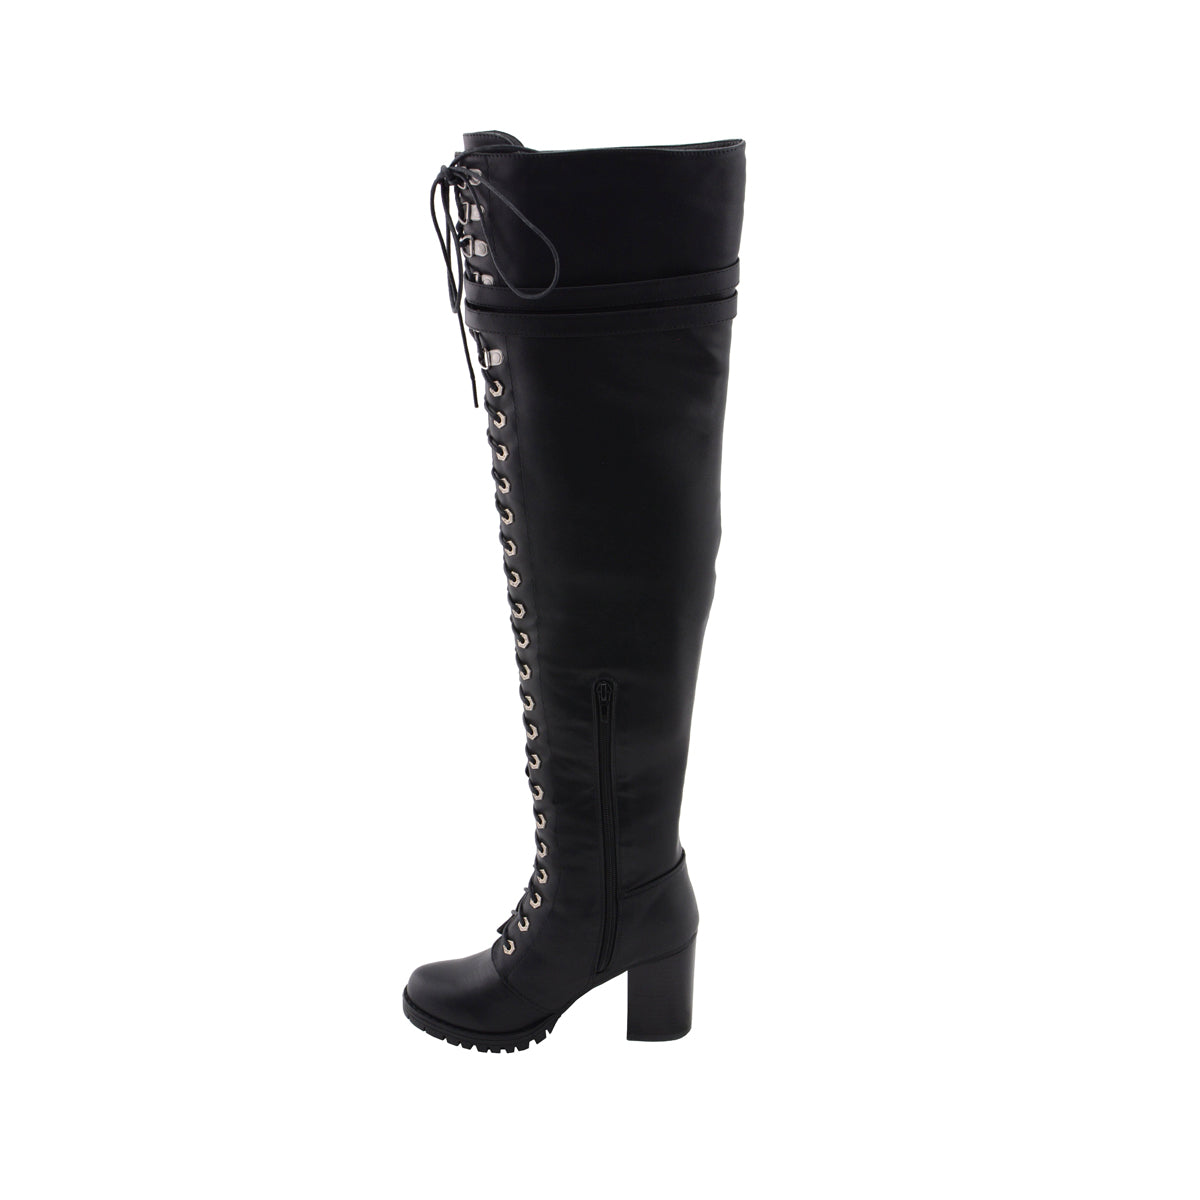 Womens Black Above the Knee Boots with Lace-Up Closure